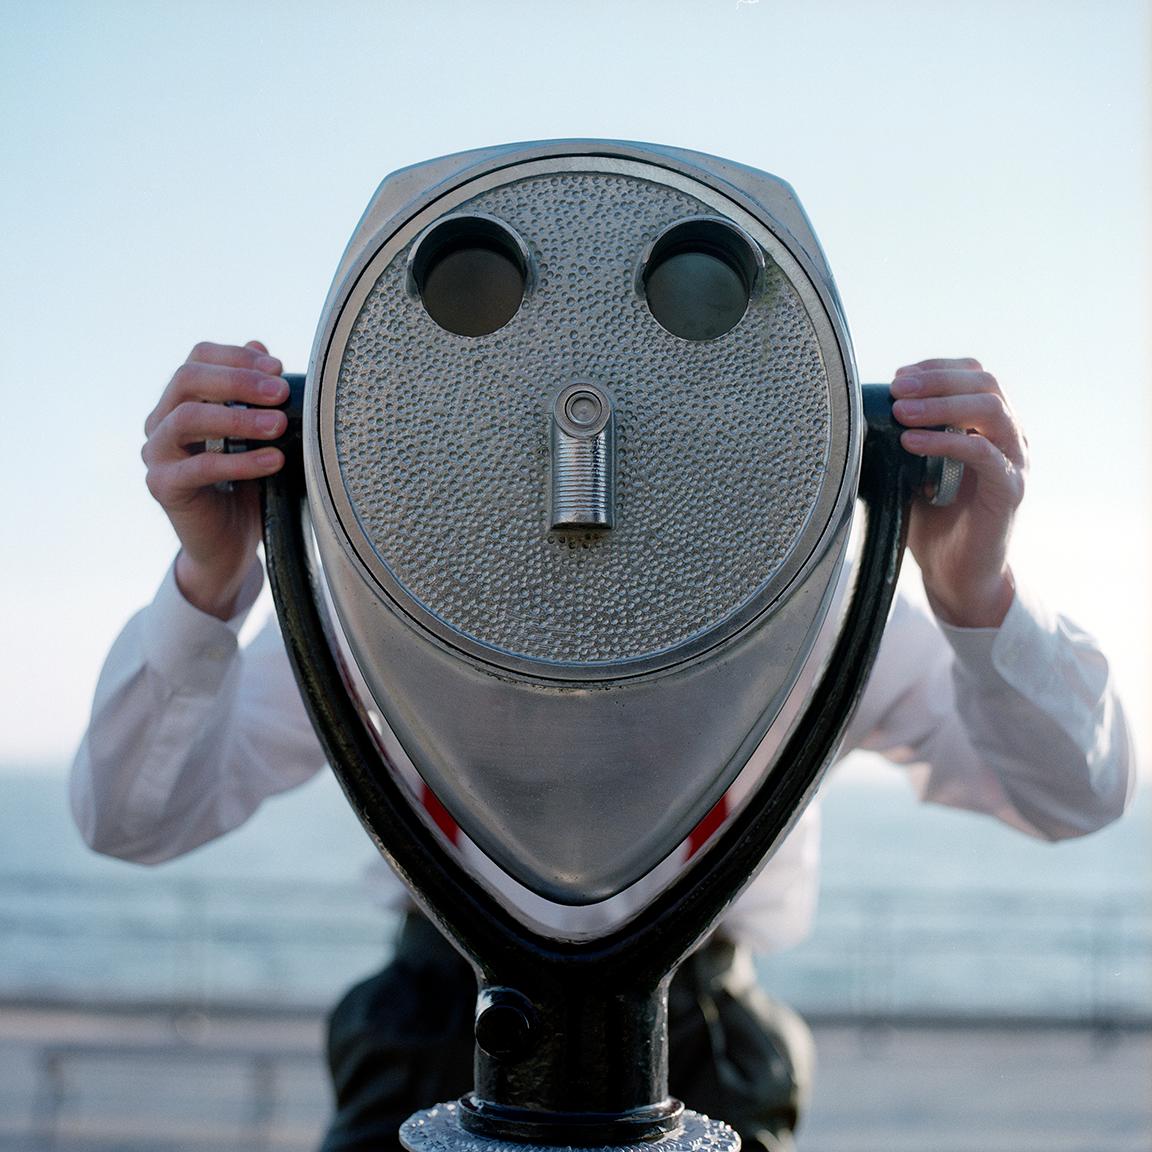 Rodney Smith Color Photograph - Viewfinder Face, New York, NY